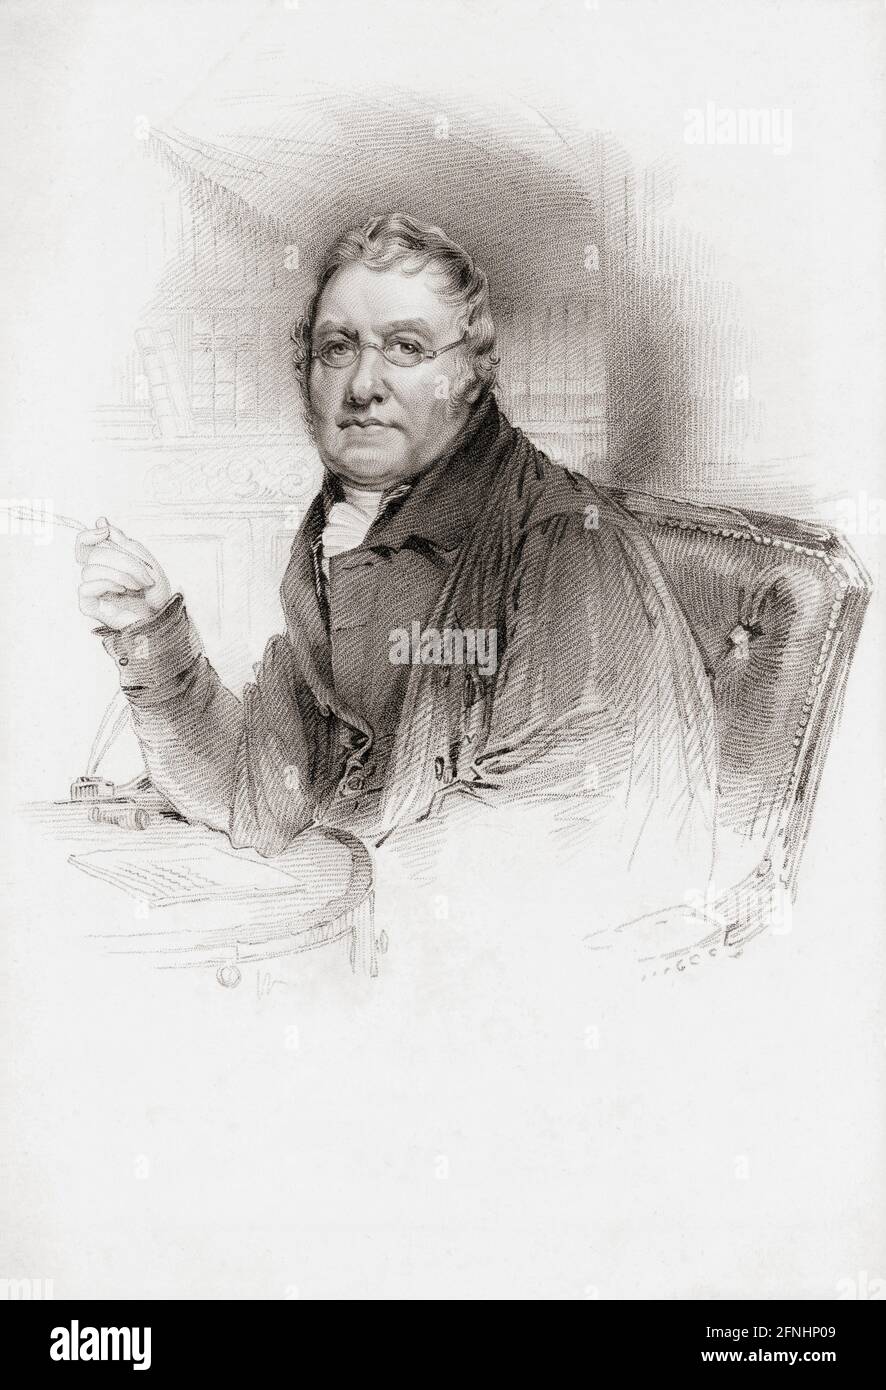 John Playfair, 1748 – 1819.  Church of Scotland minister, scientist, mathematician, professor of natural philosophy.  After an engraving by James Thomson. Stock Photo